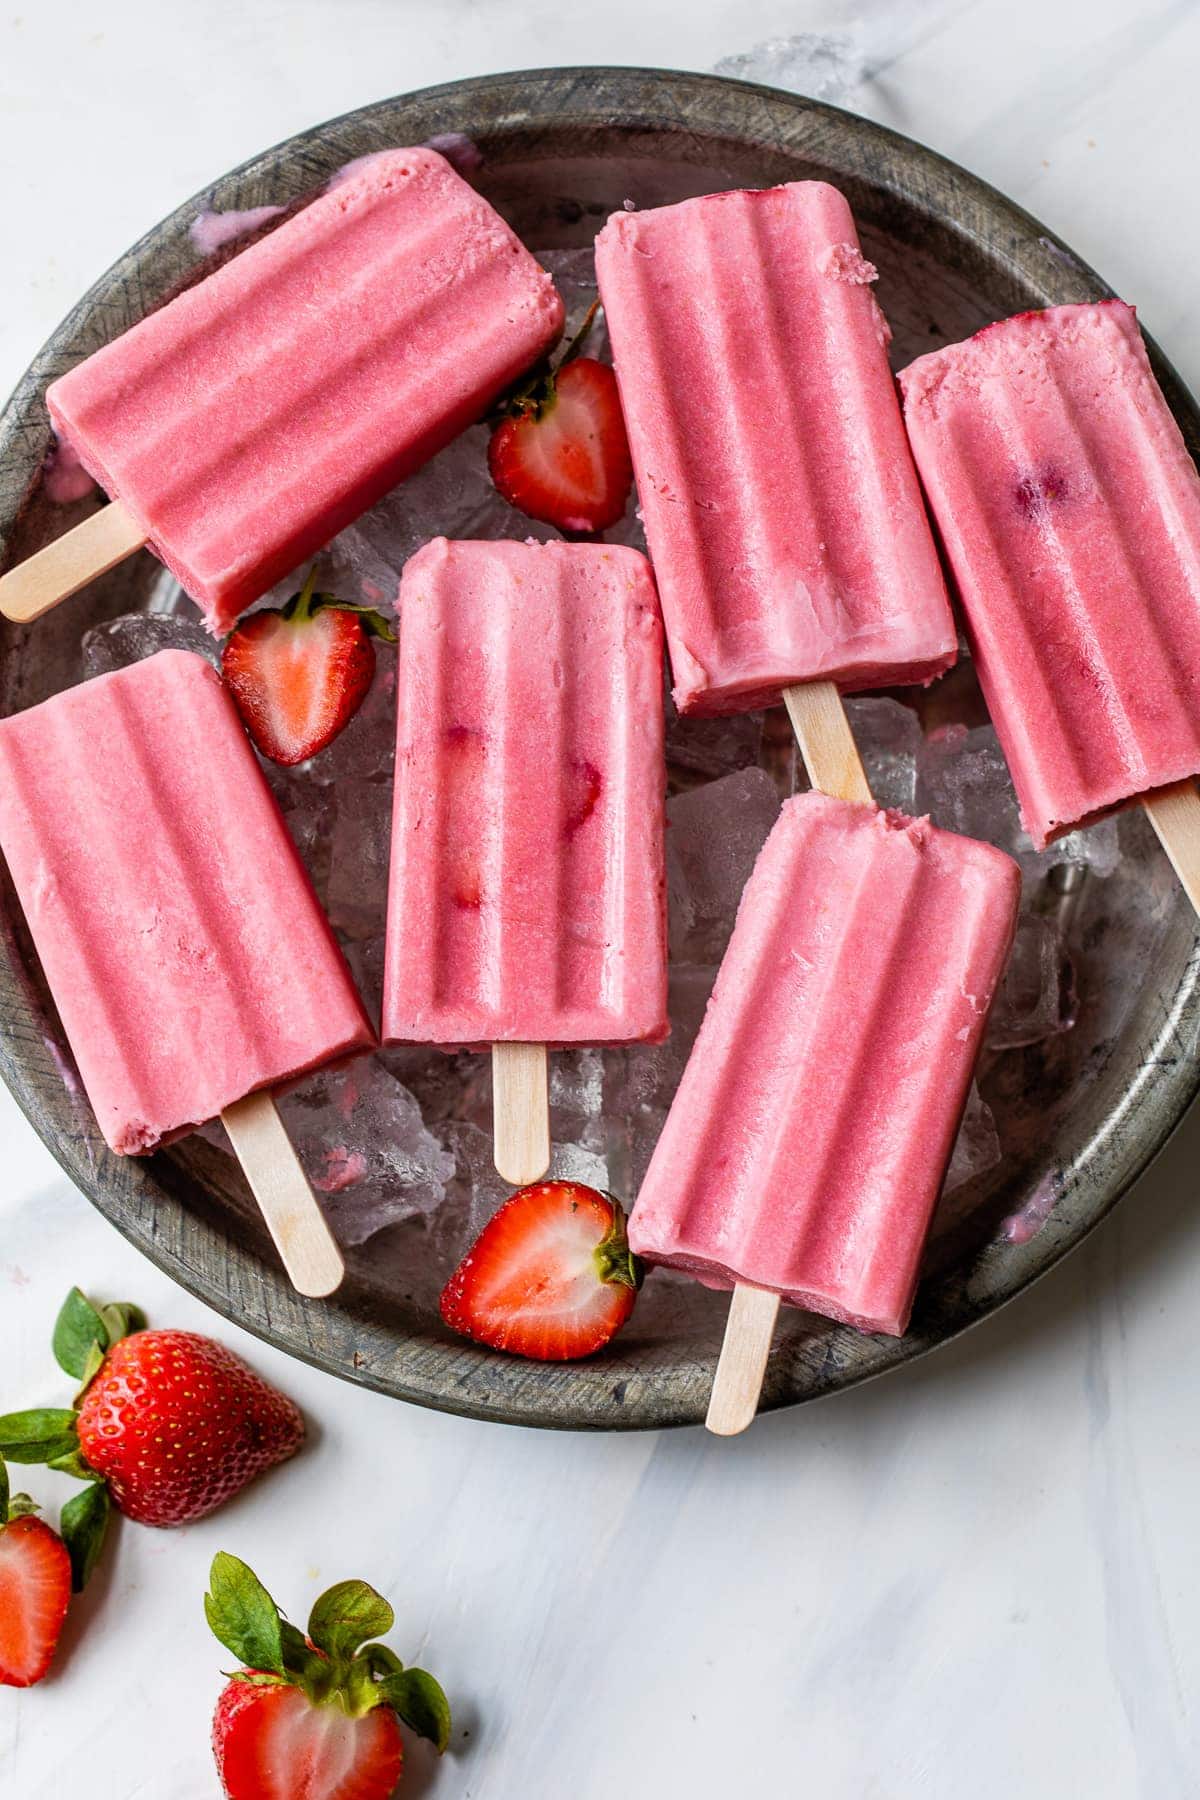 Strawberries and cream popsicles ready to be eaten.